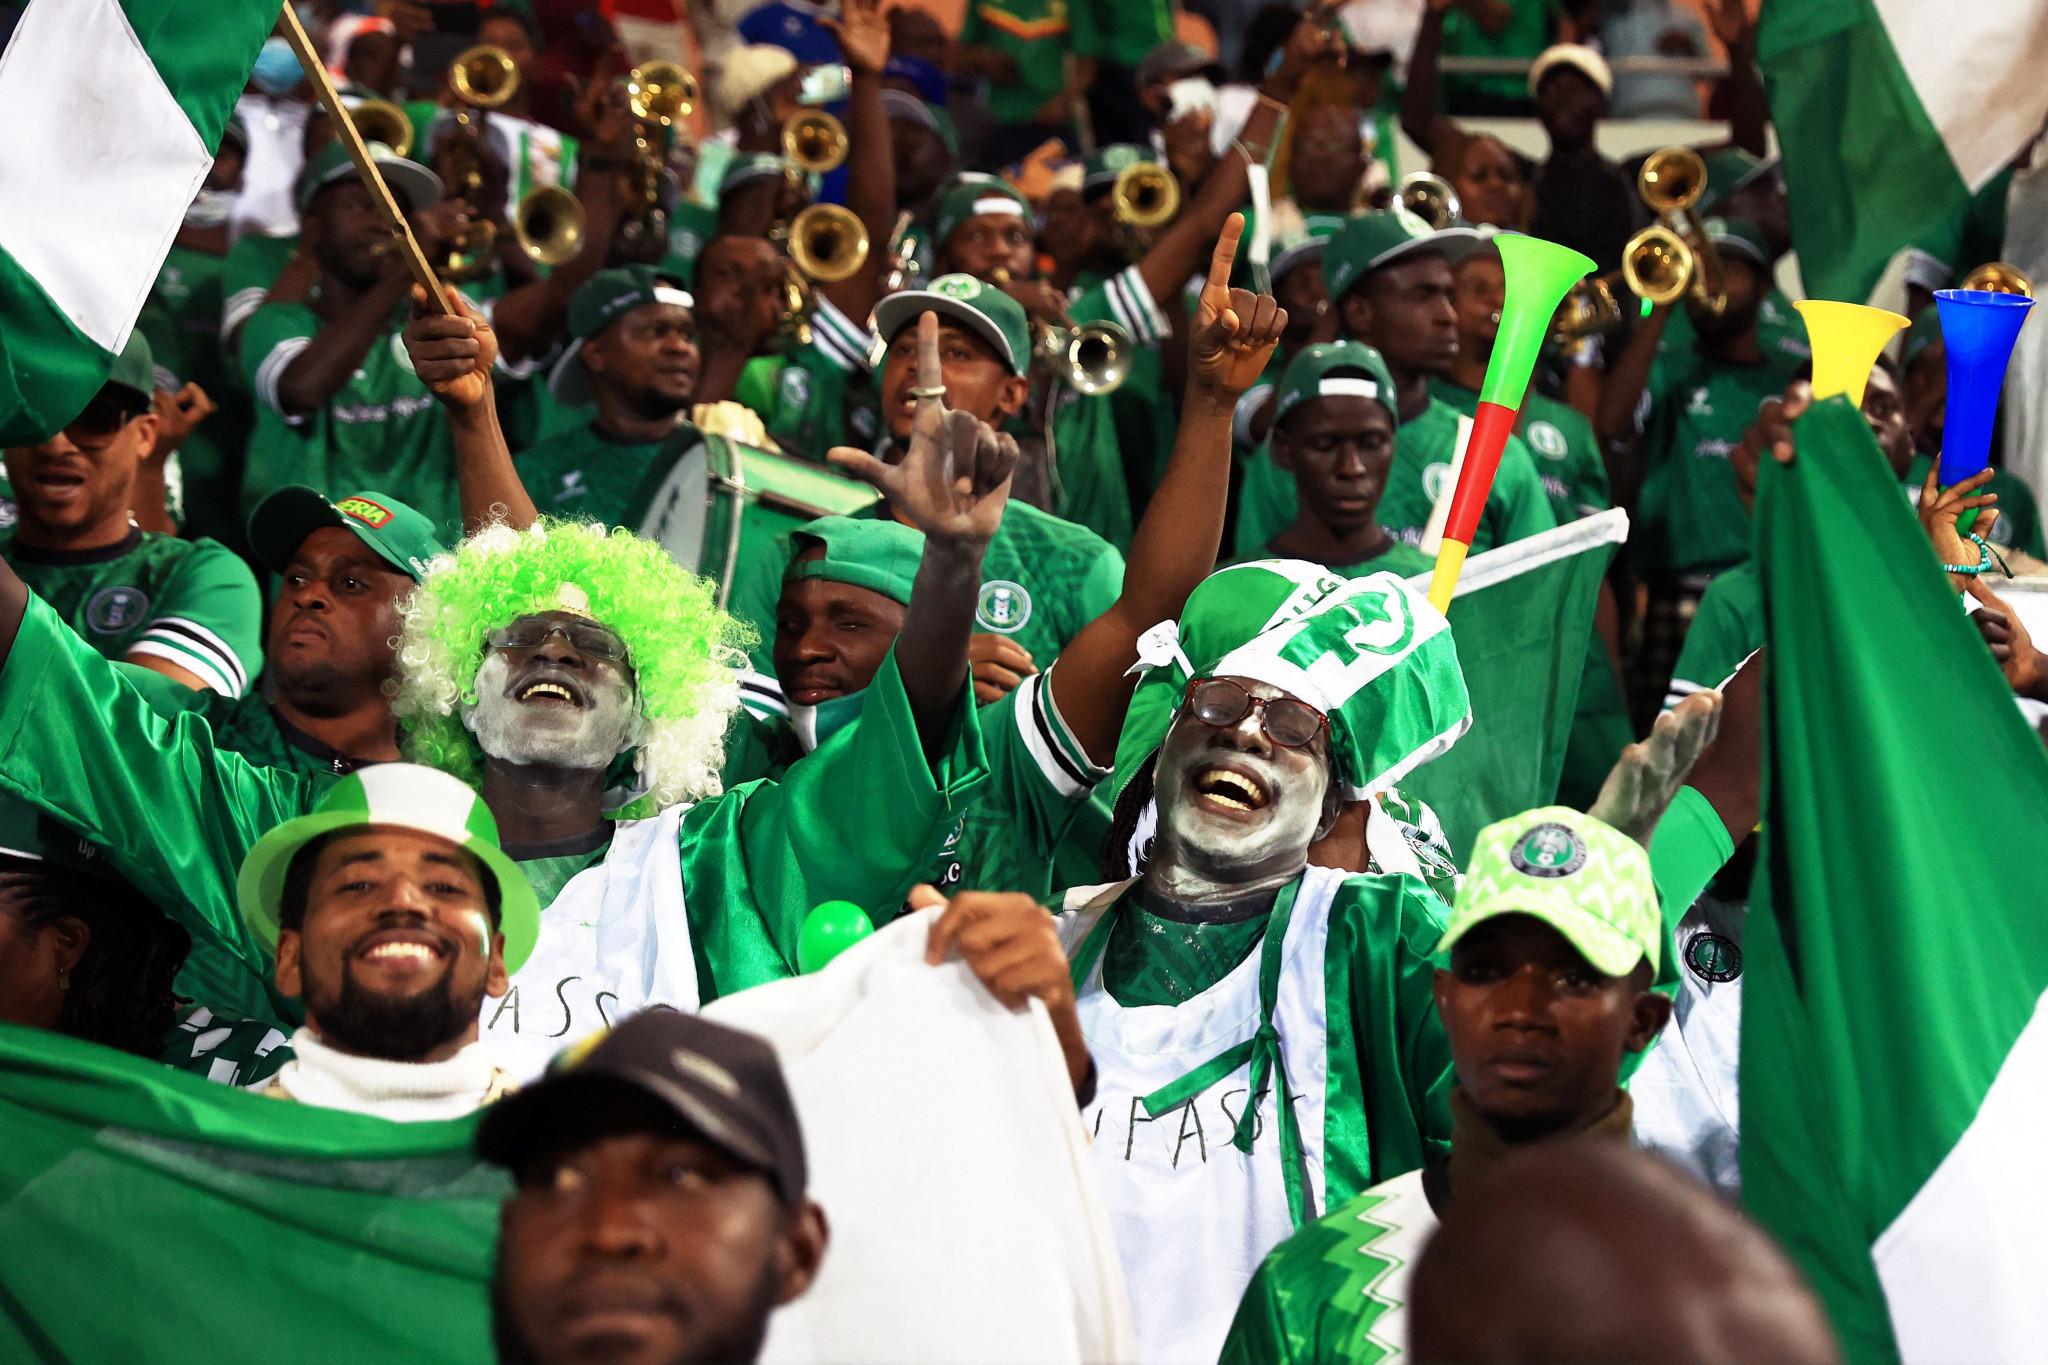 Nigeria's followers of the under-23 Olympic Eagles may yet be able to see the team play at Paris 2024 if an appeal concerning an over-age opponent is successful ©Getty Images